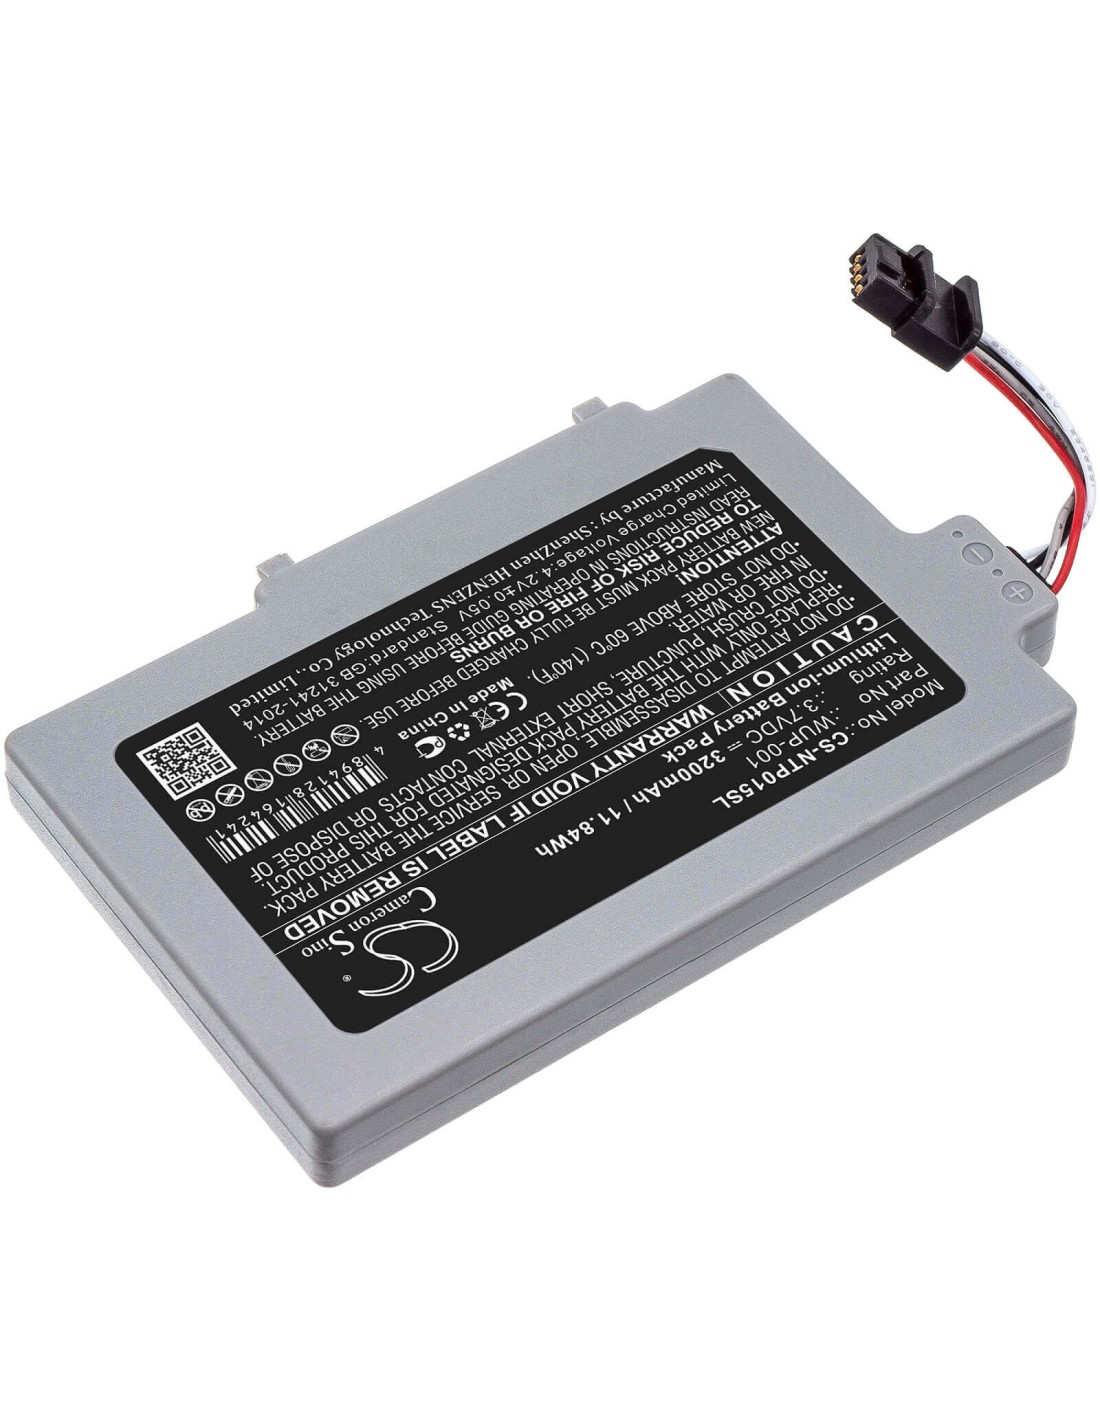 Battery for Nintendo, Wii U Gamepad Wup-001 3.7V, 3200mAh - 11.84Wh